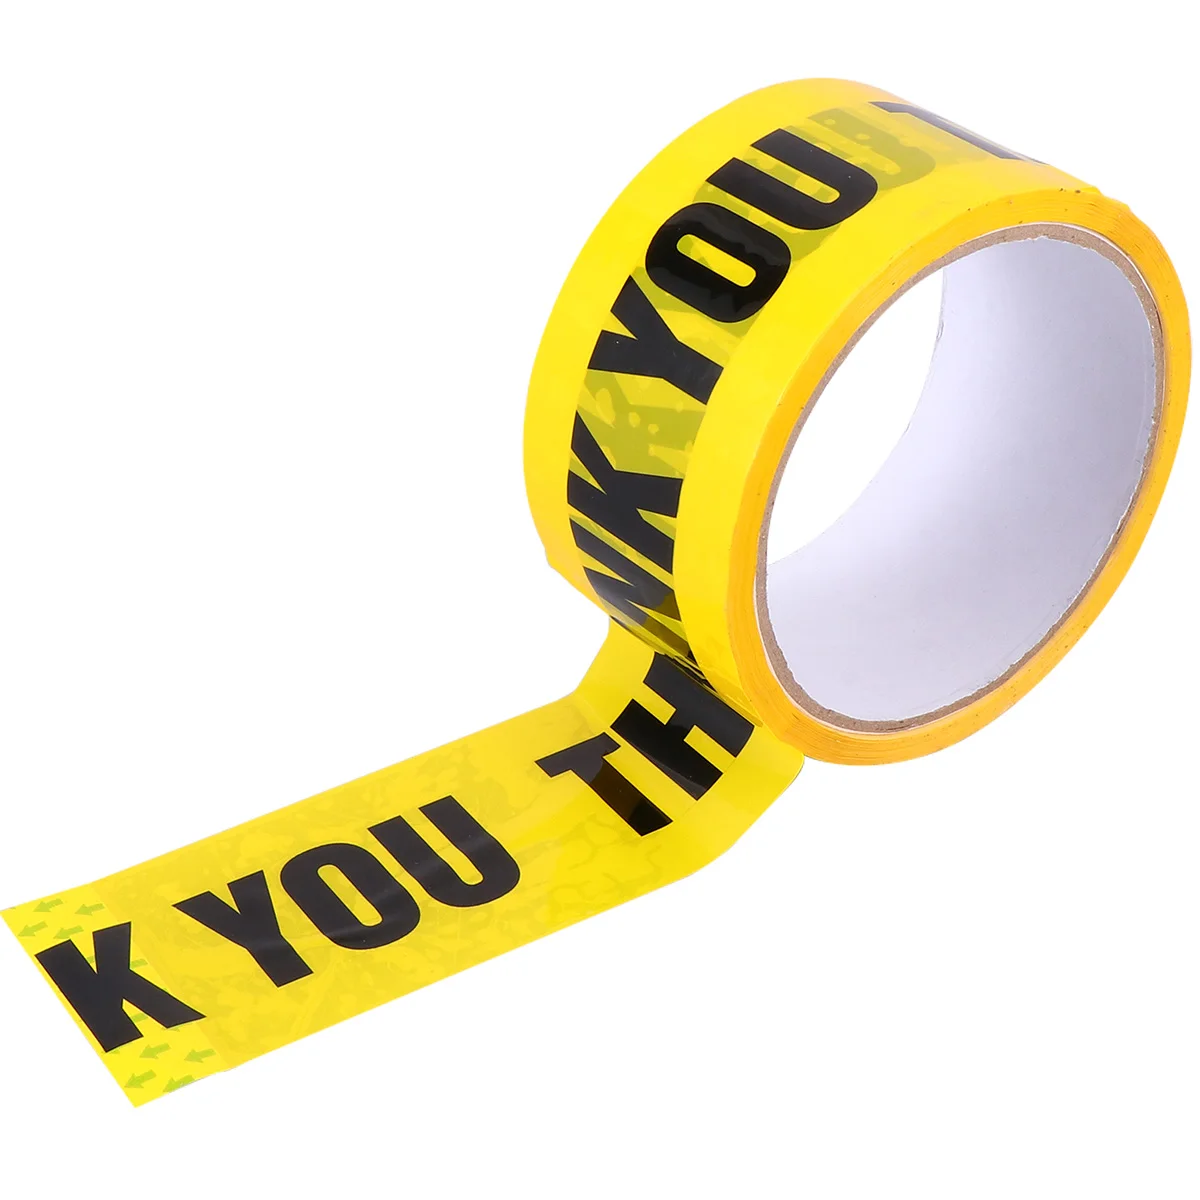 

1 Roll THANK YOU Safety Tape Safe Self Adhesive Sticker Warning Tape Masking Tape for Walls Floors Pipes (Yellow)